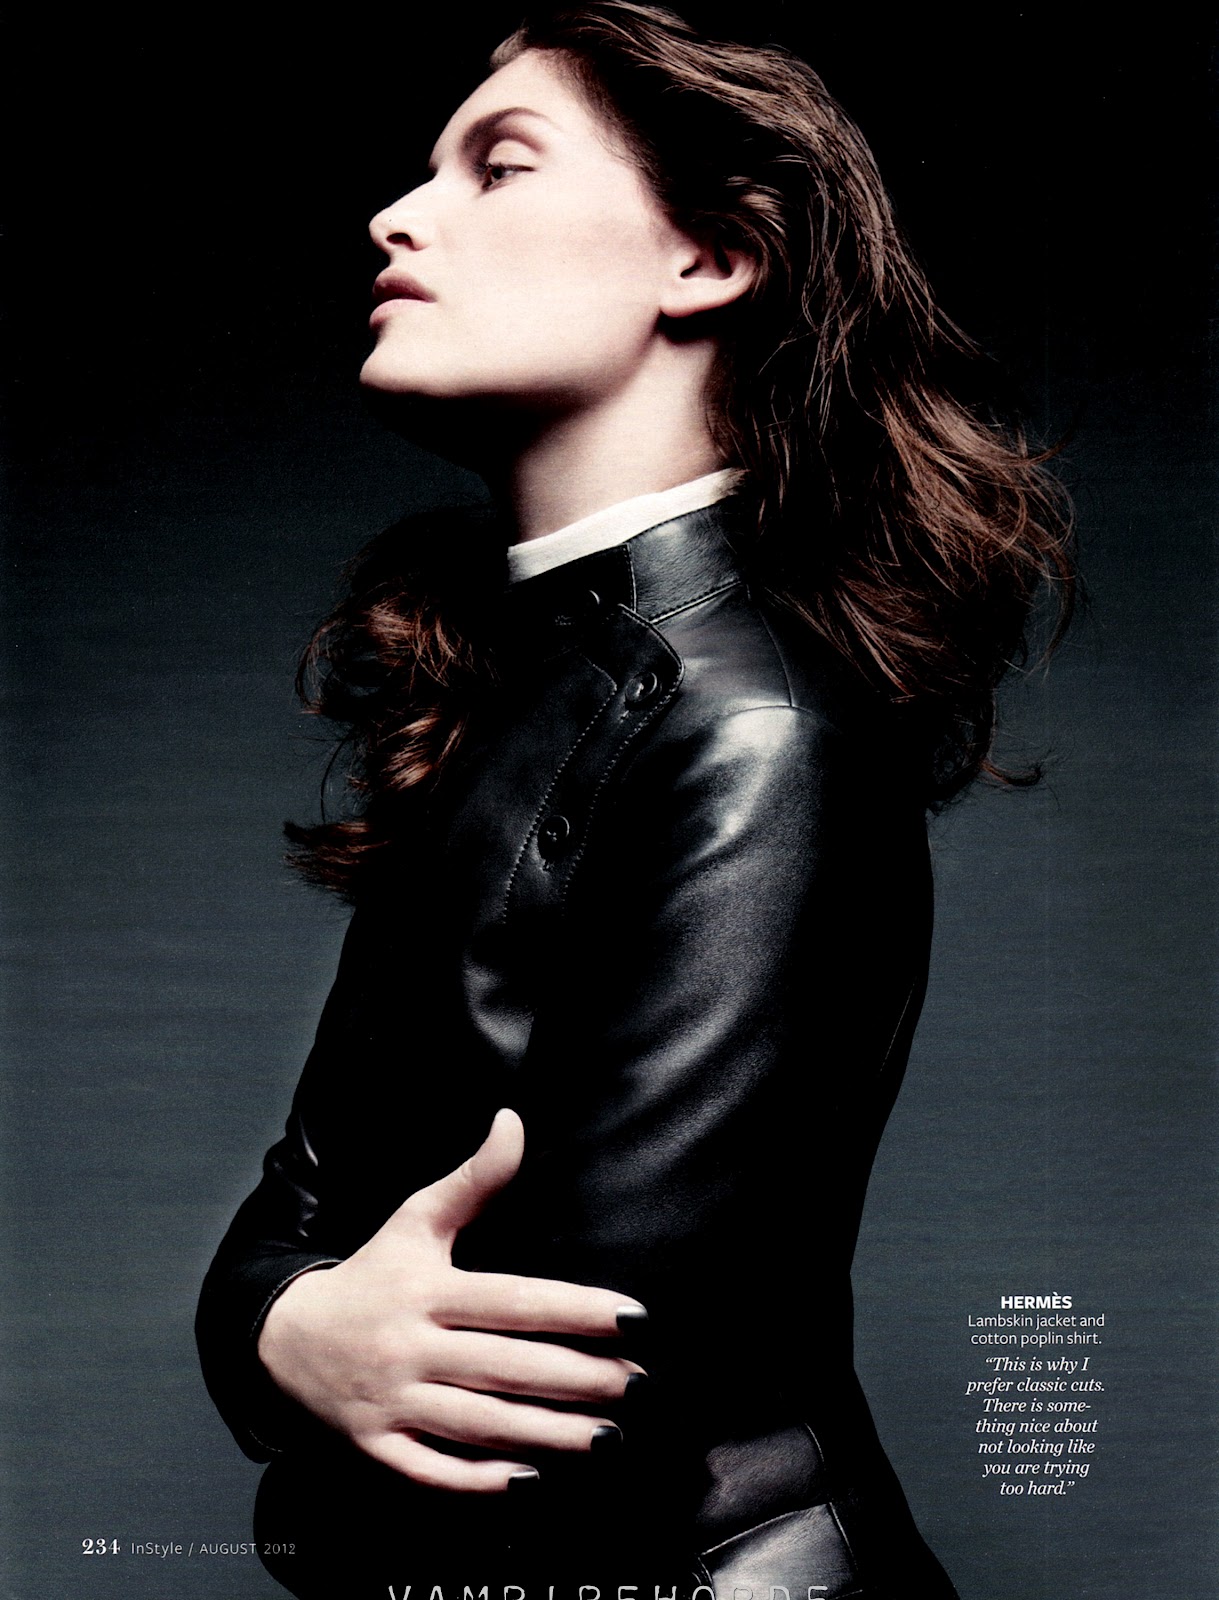 http://1.bp.blogspot.com/-X2cFDiXzO-E/T_2clN7YZGI/AAAAAAABxho/fTViGGaCbYE/s1600/fashion_scans_remastered-laetitia_casta-instyle_usa-august_2012-scanned_by_vampirehorde-hq-4.jpg